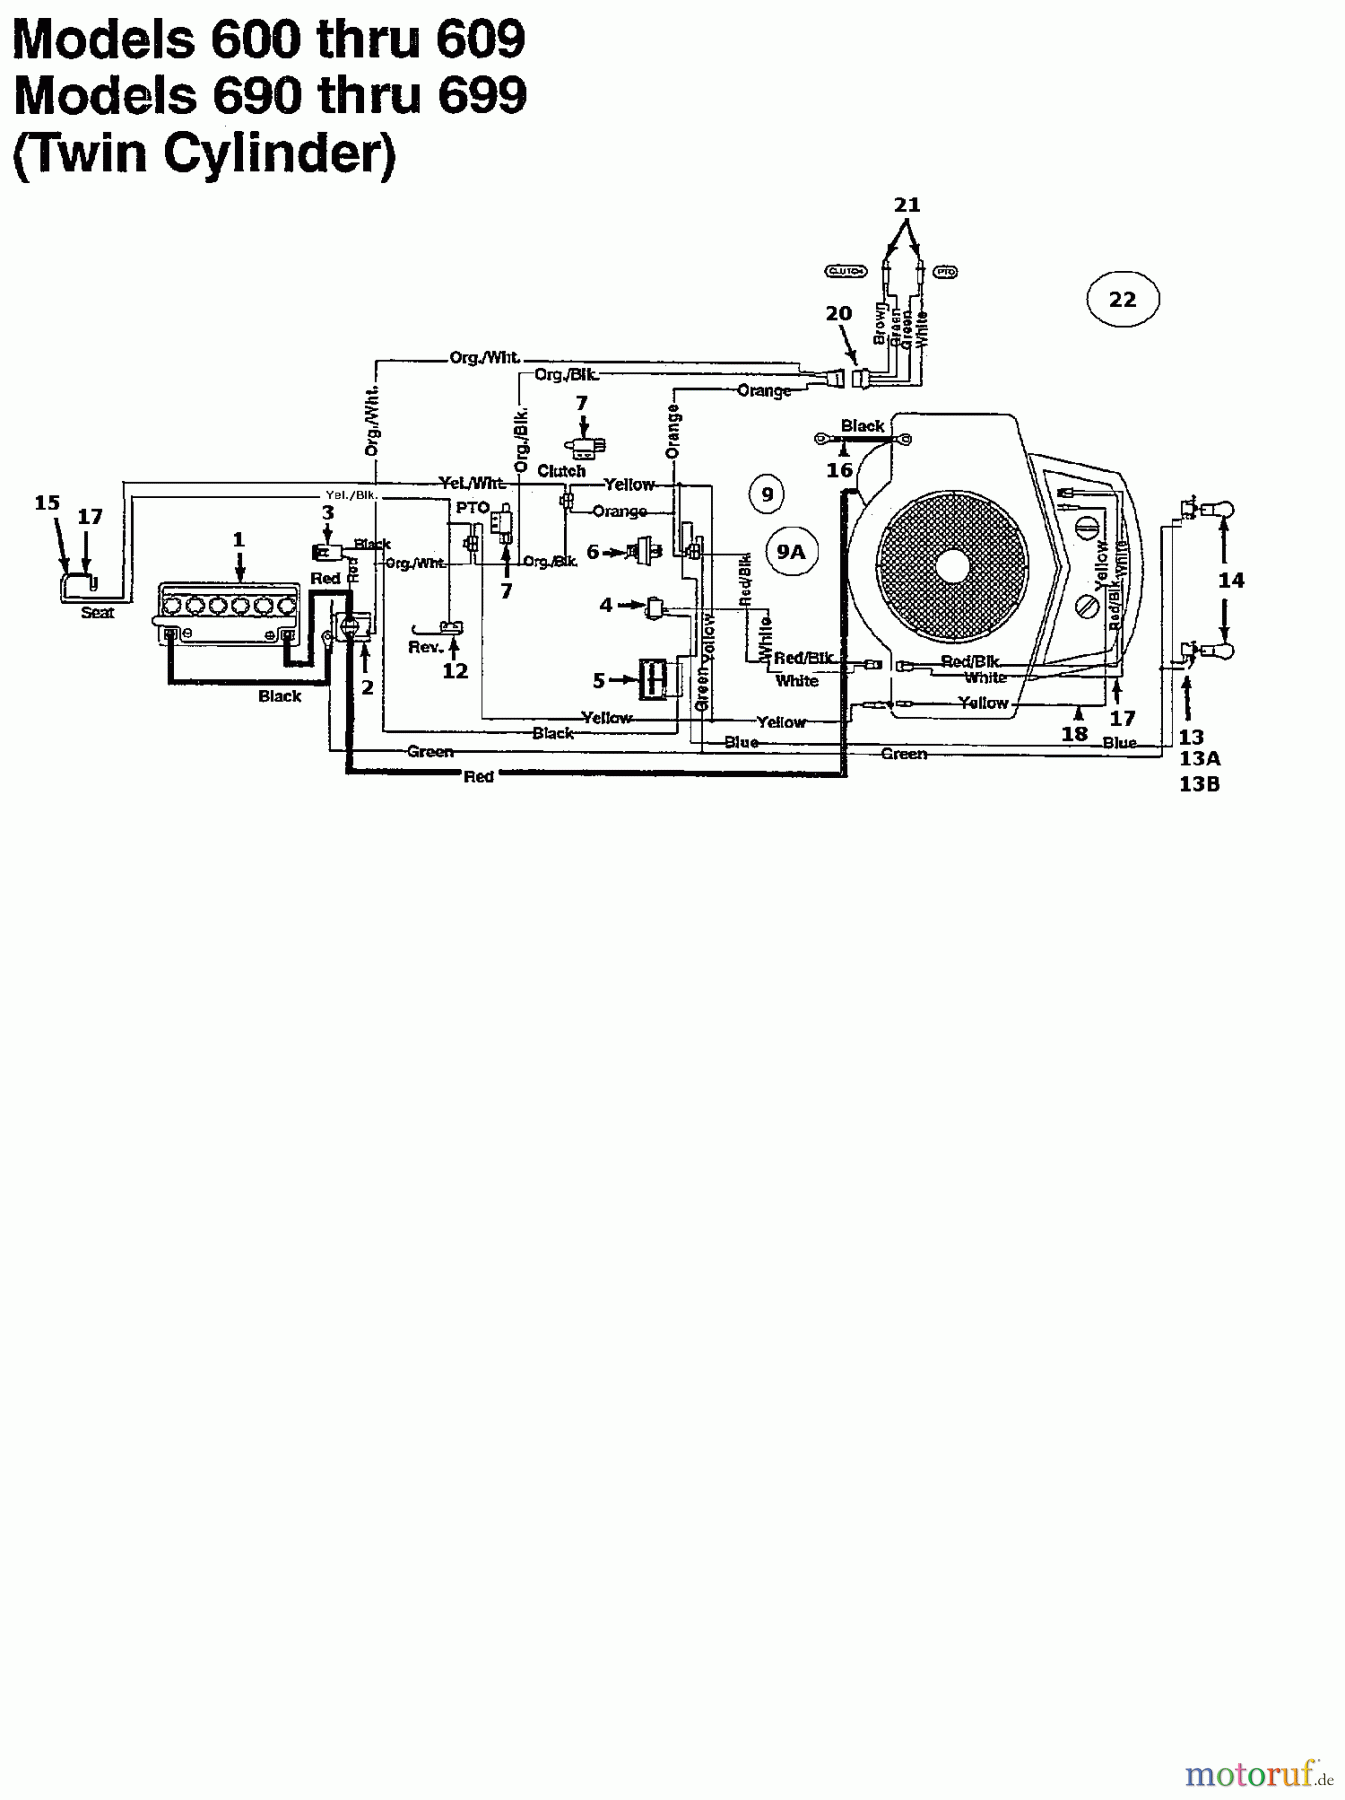  MTD Lawn tractors H 165 135T695G678  (1995) Wiring diagram twin cylinder